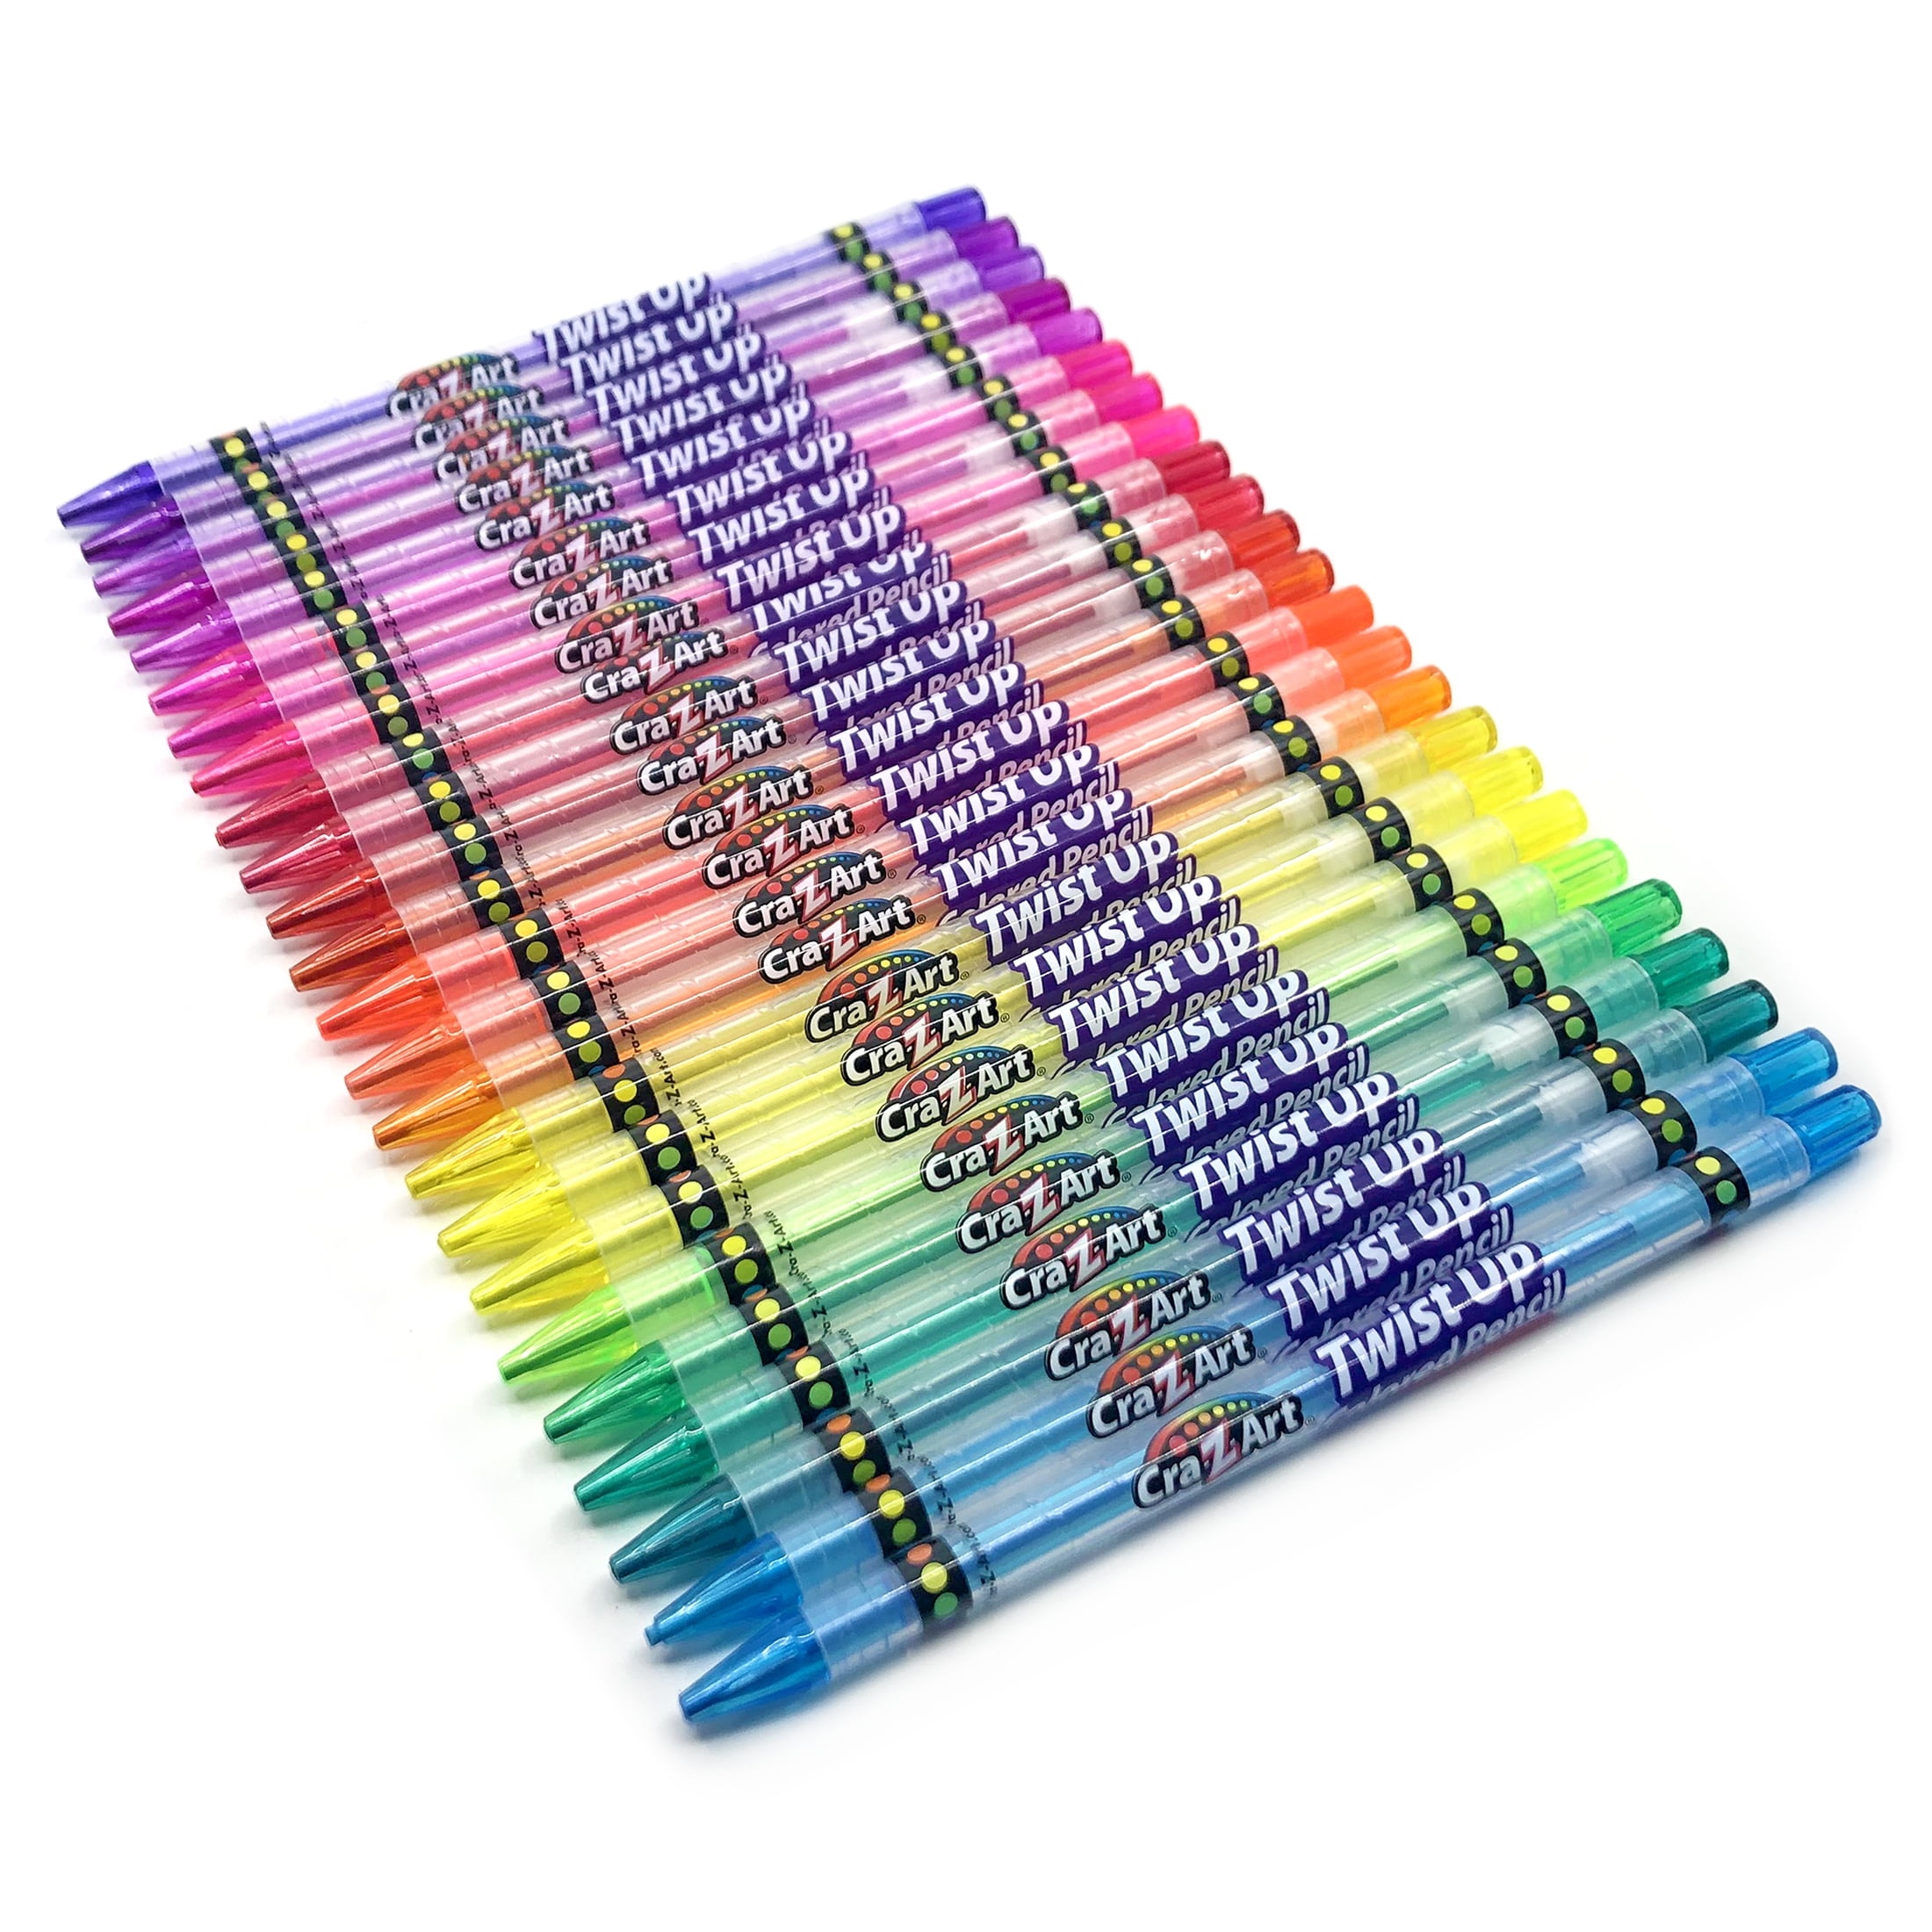 2923 Colorful Pens Isolated Graphic by Kzara Visual · Creative Fabrica